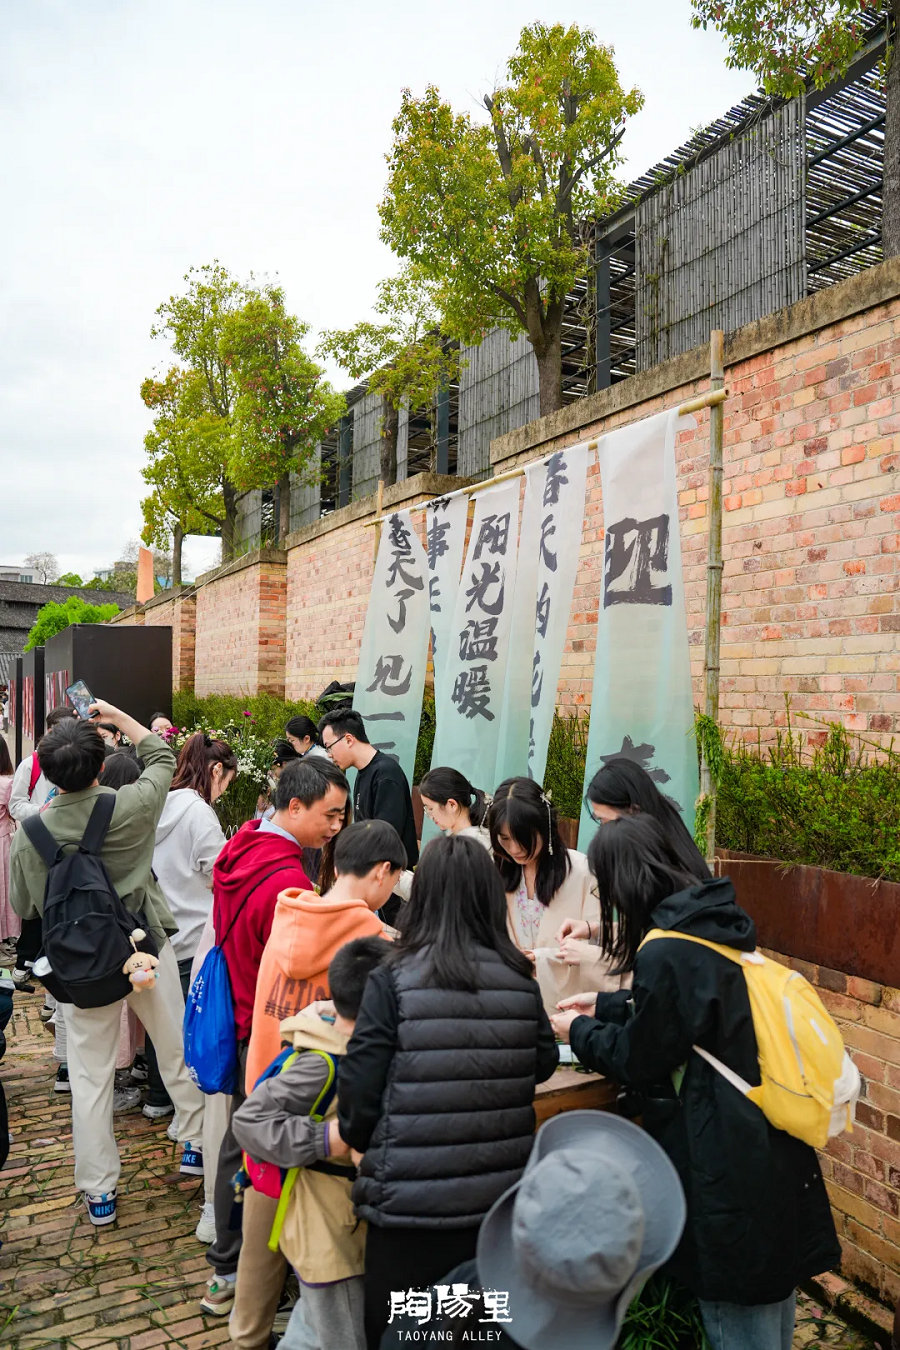 Taoyang Alley Tourism District boomed again during the Qingming holiday